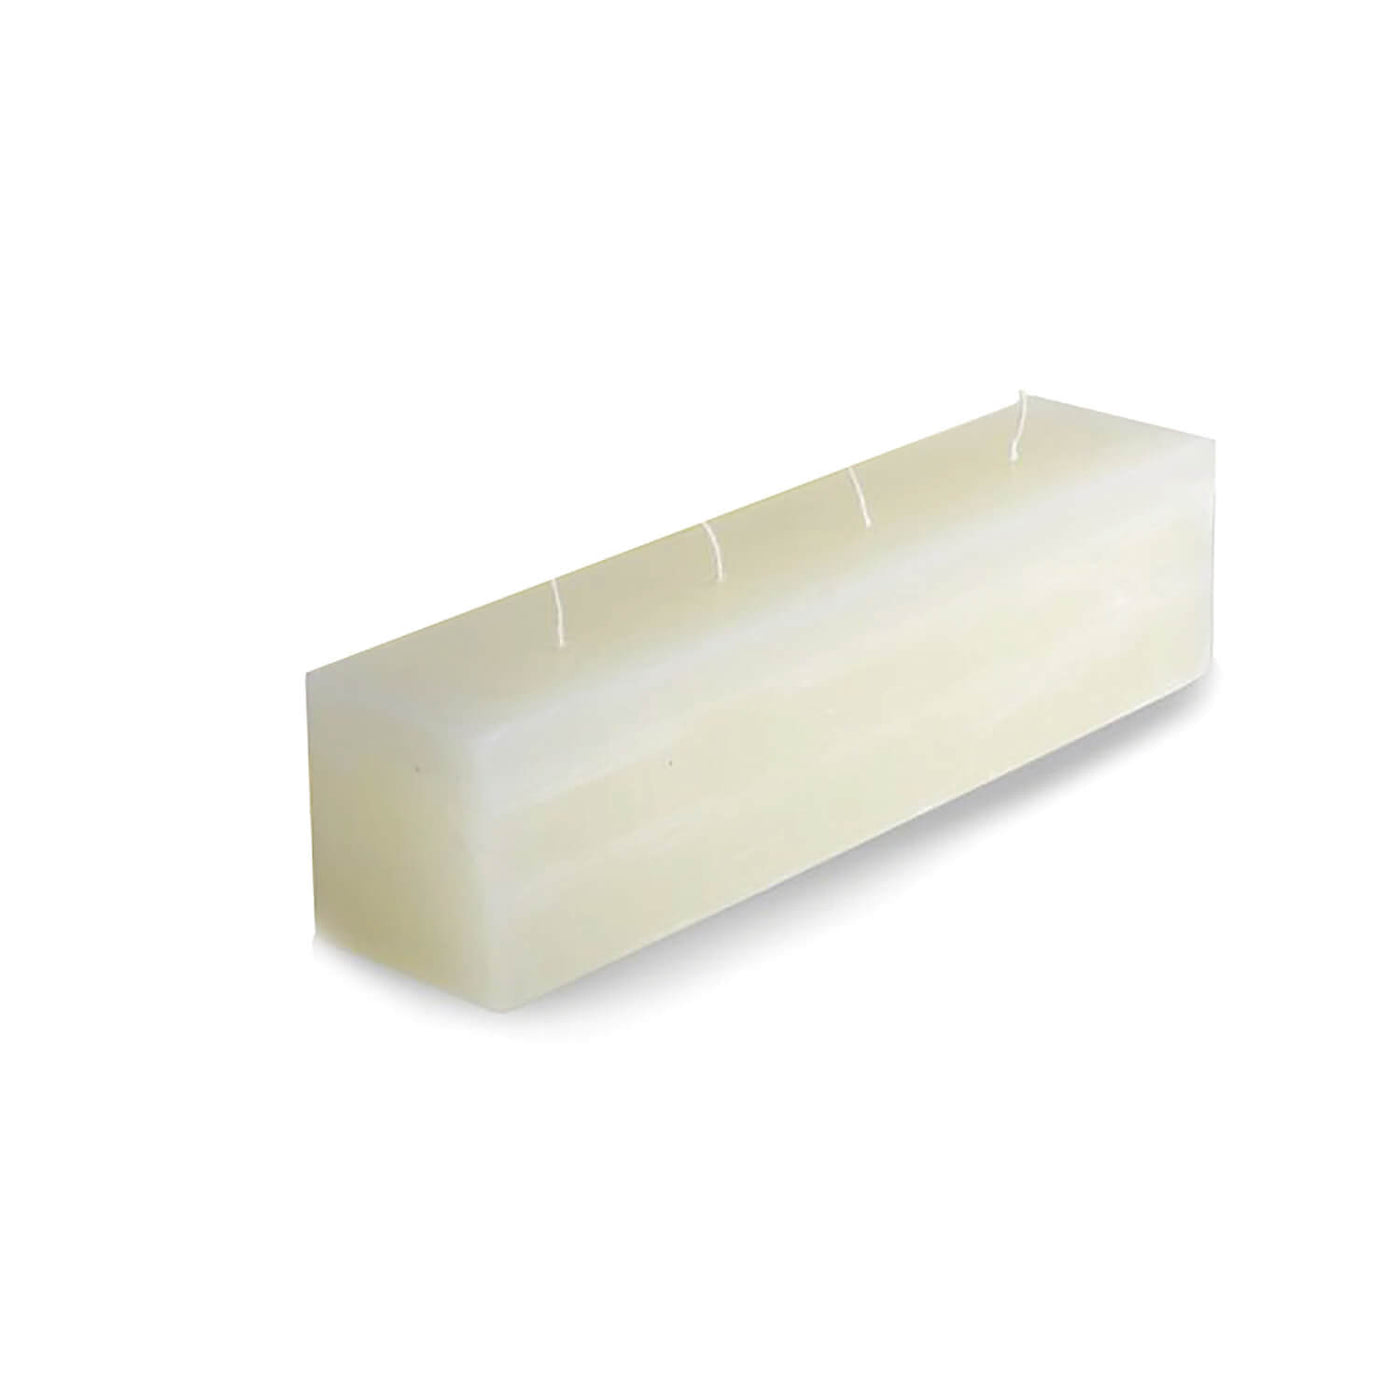 12” Coconut Ice white brick candle with 4 wicks